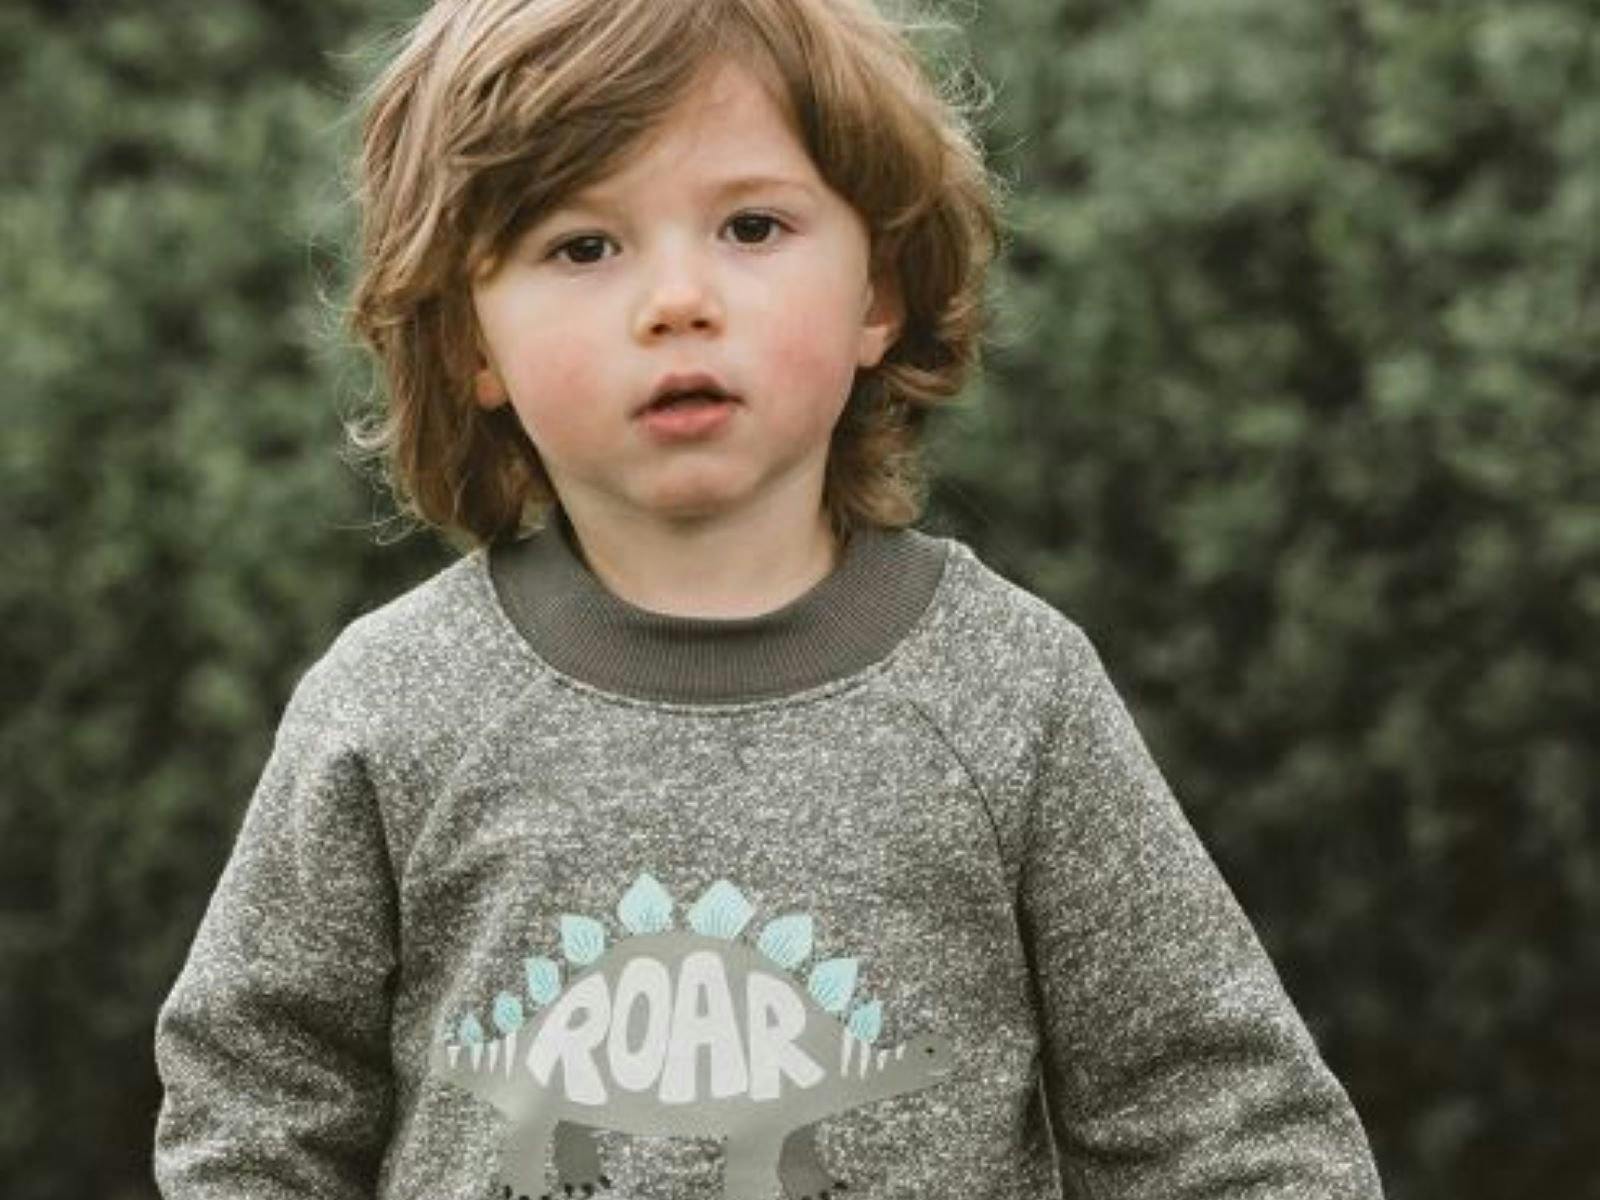 A child wearing a grey/green jumper with a dinosoar on the front